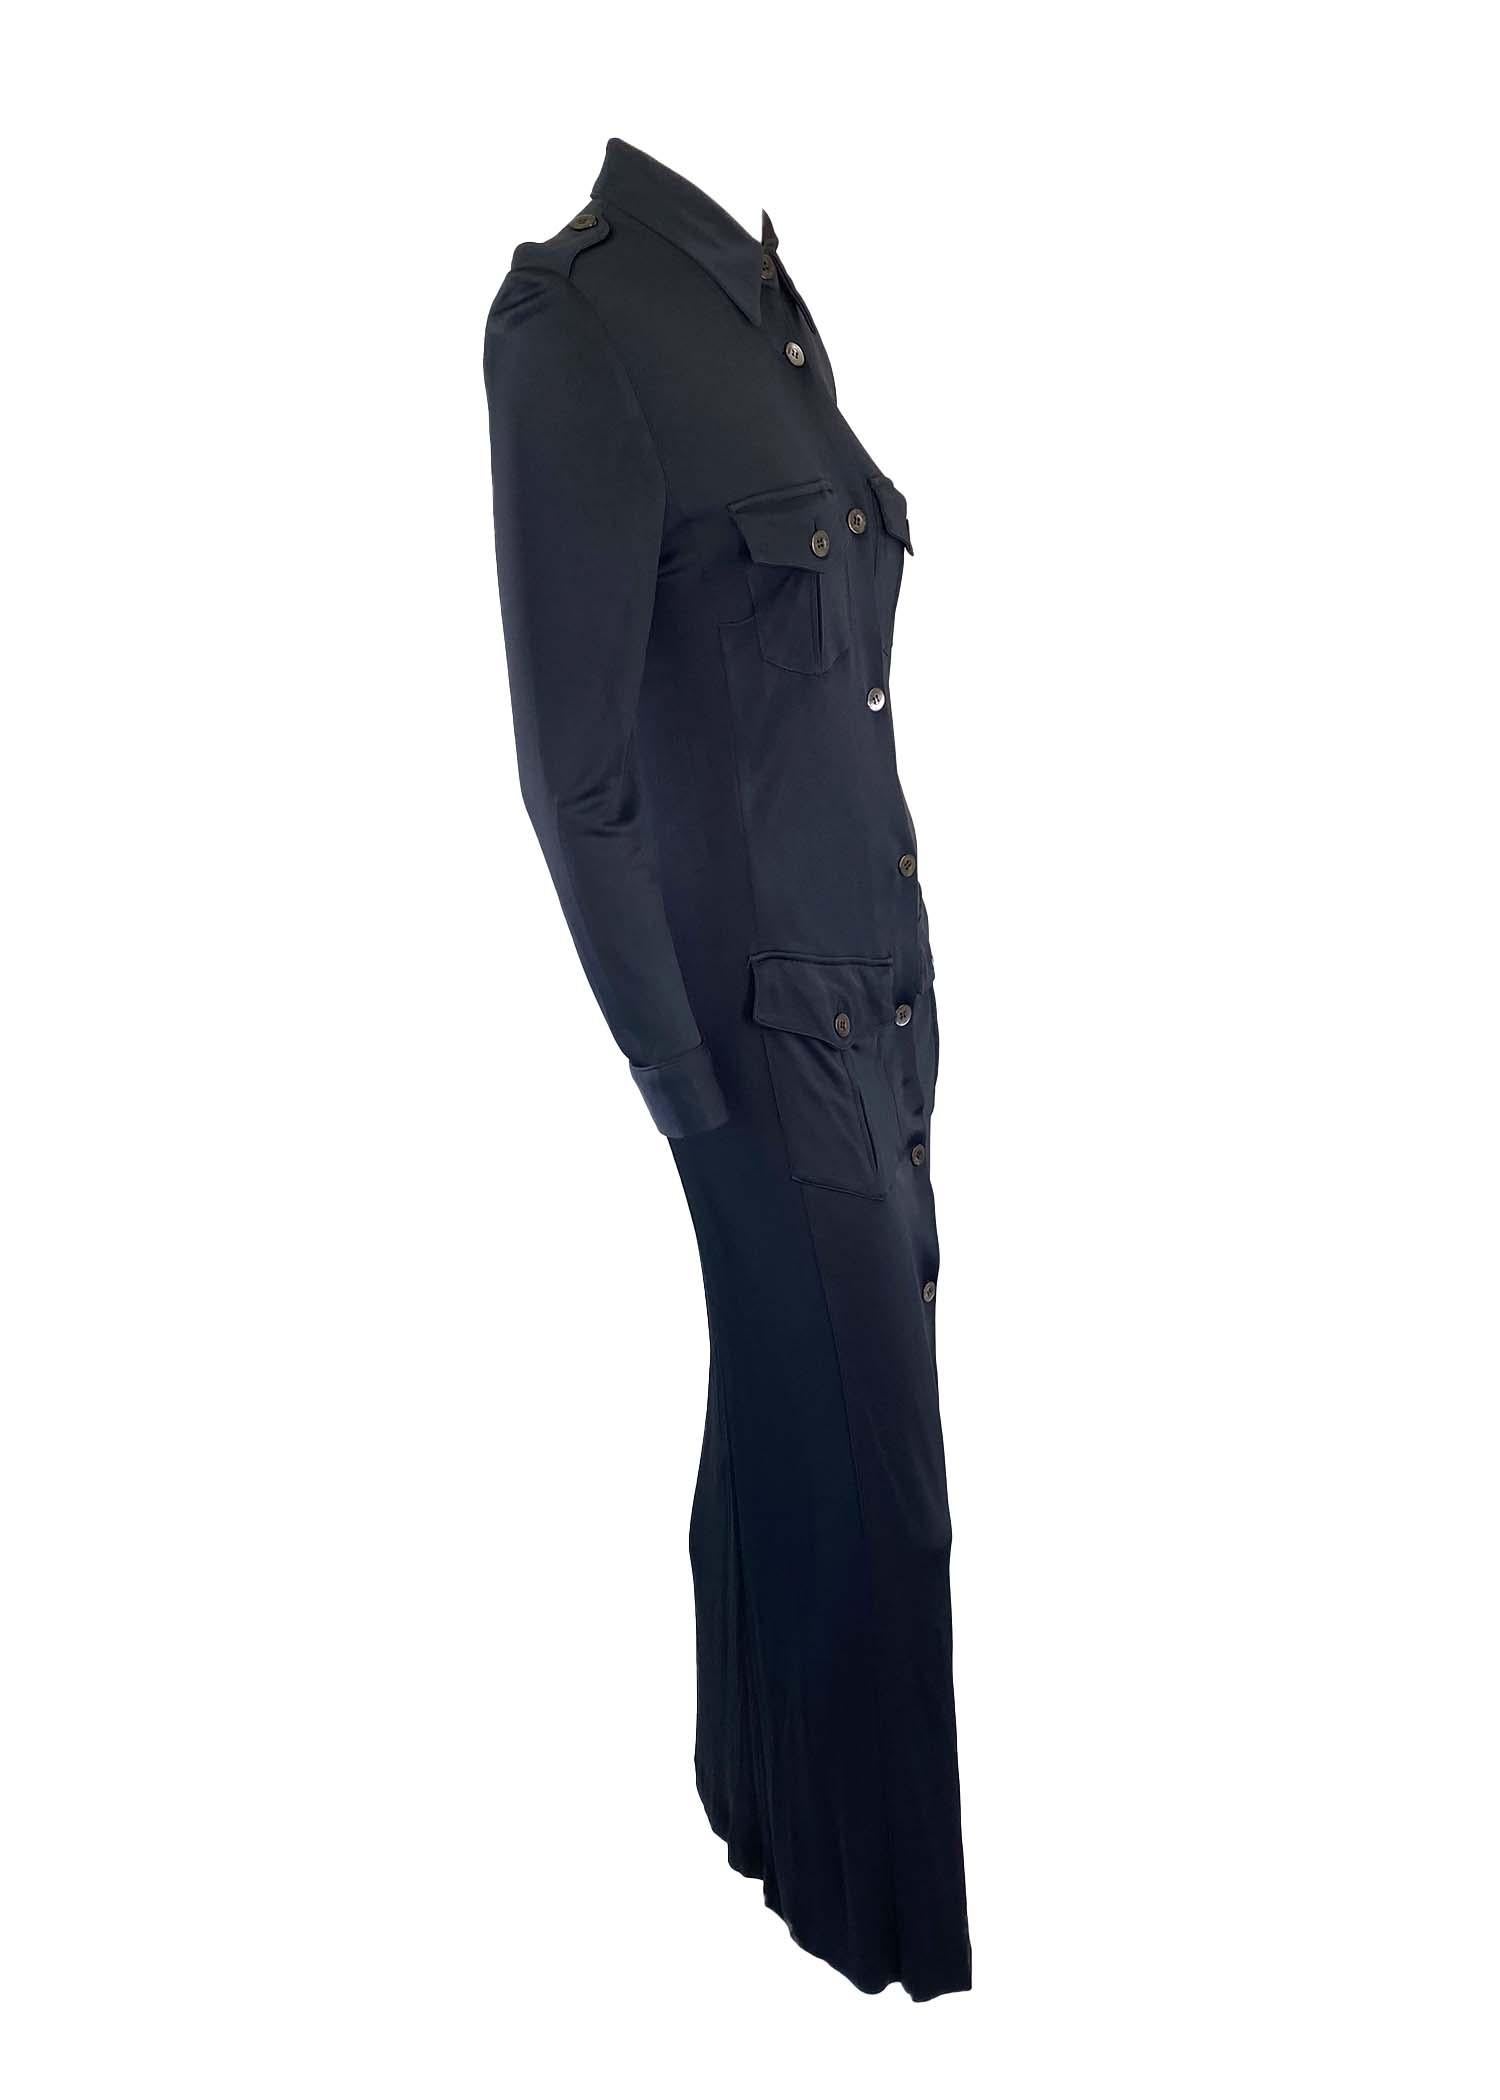 S/S 1996 Gucci by Tom Ford Nicole Kidman Navy Viscose Maxi Dress with Tie  For Sale 3